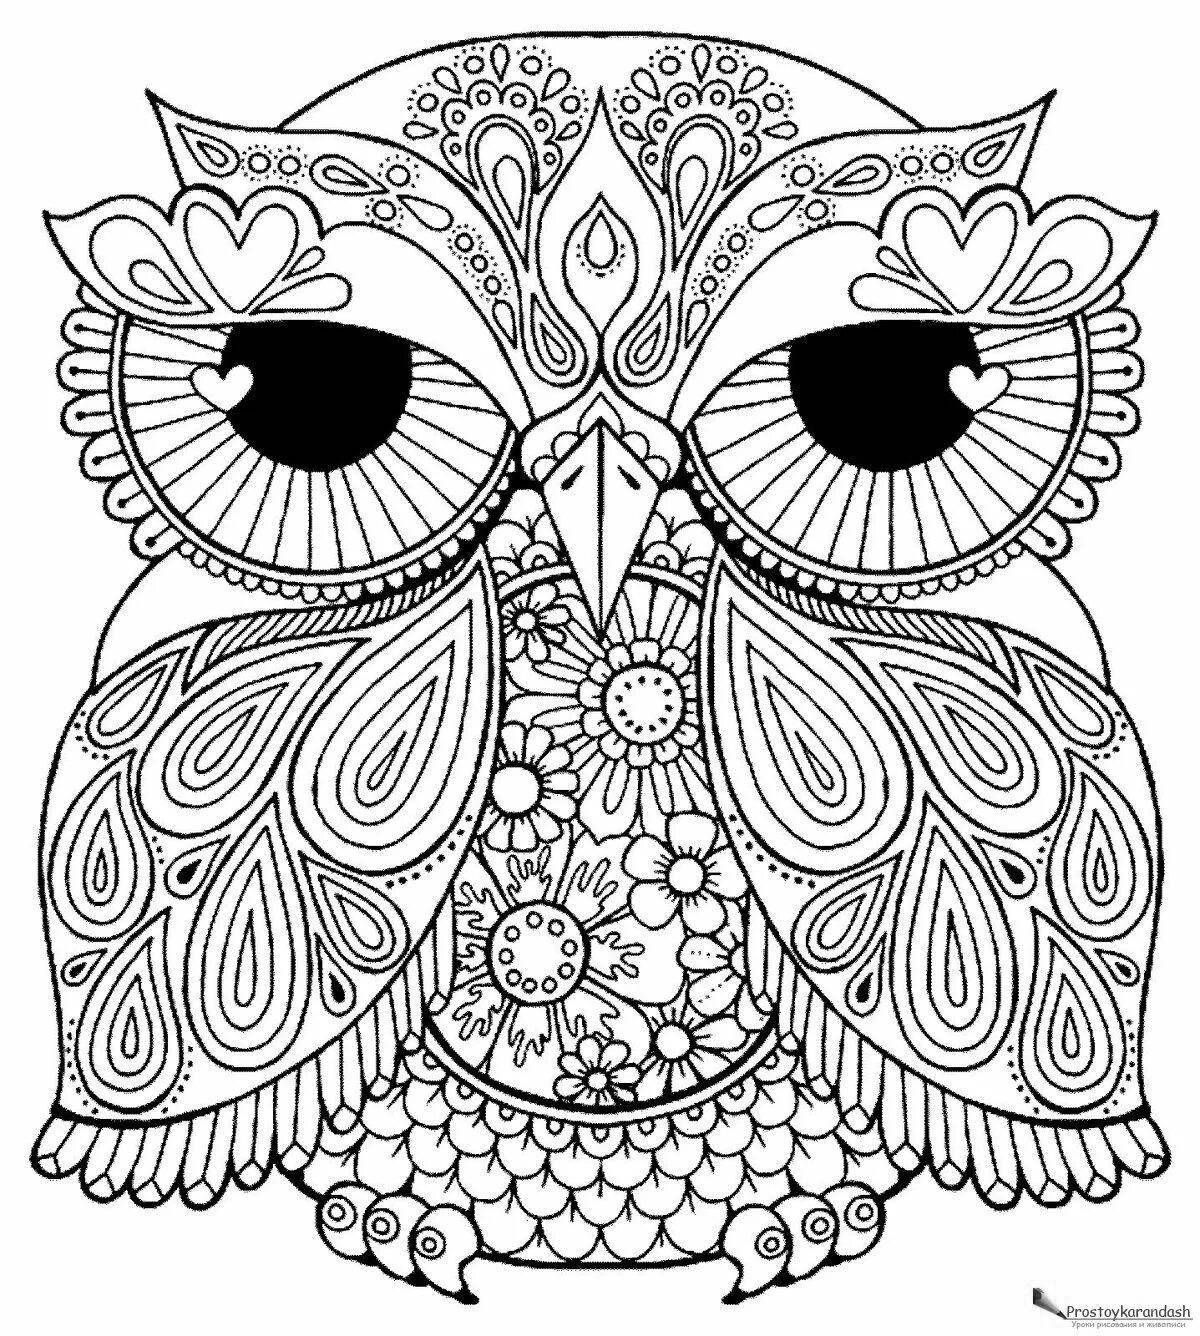 Charming complex coloring book